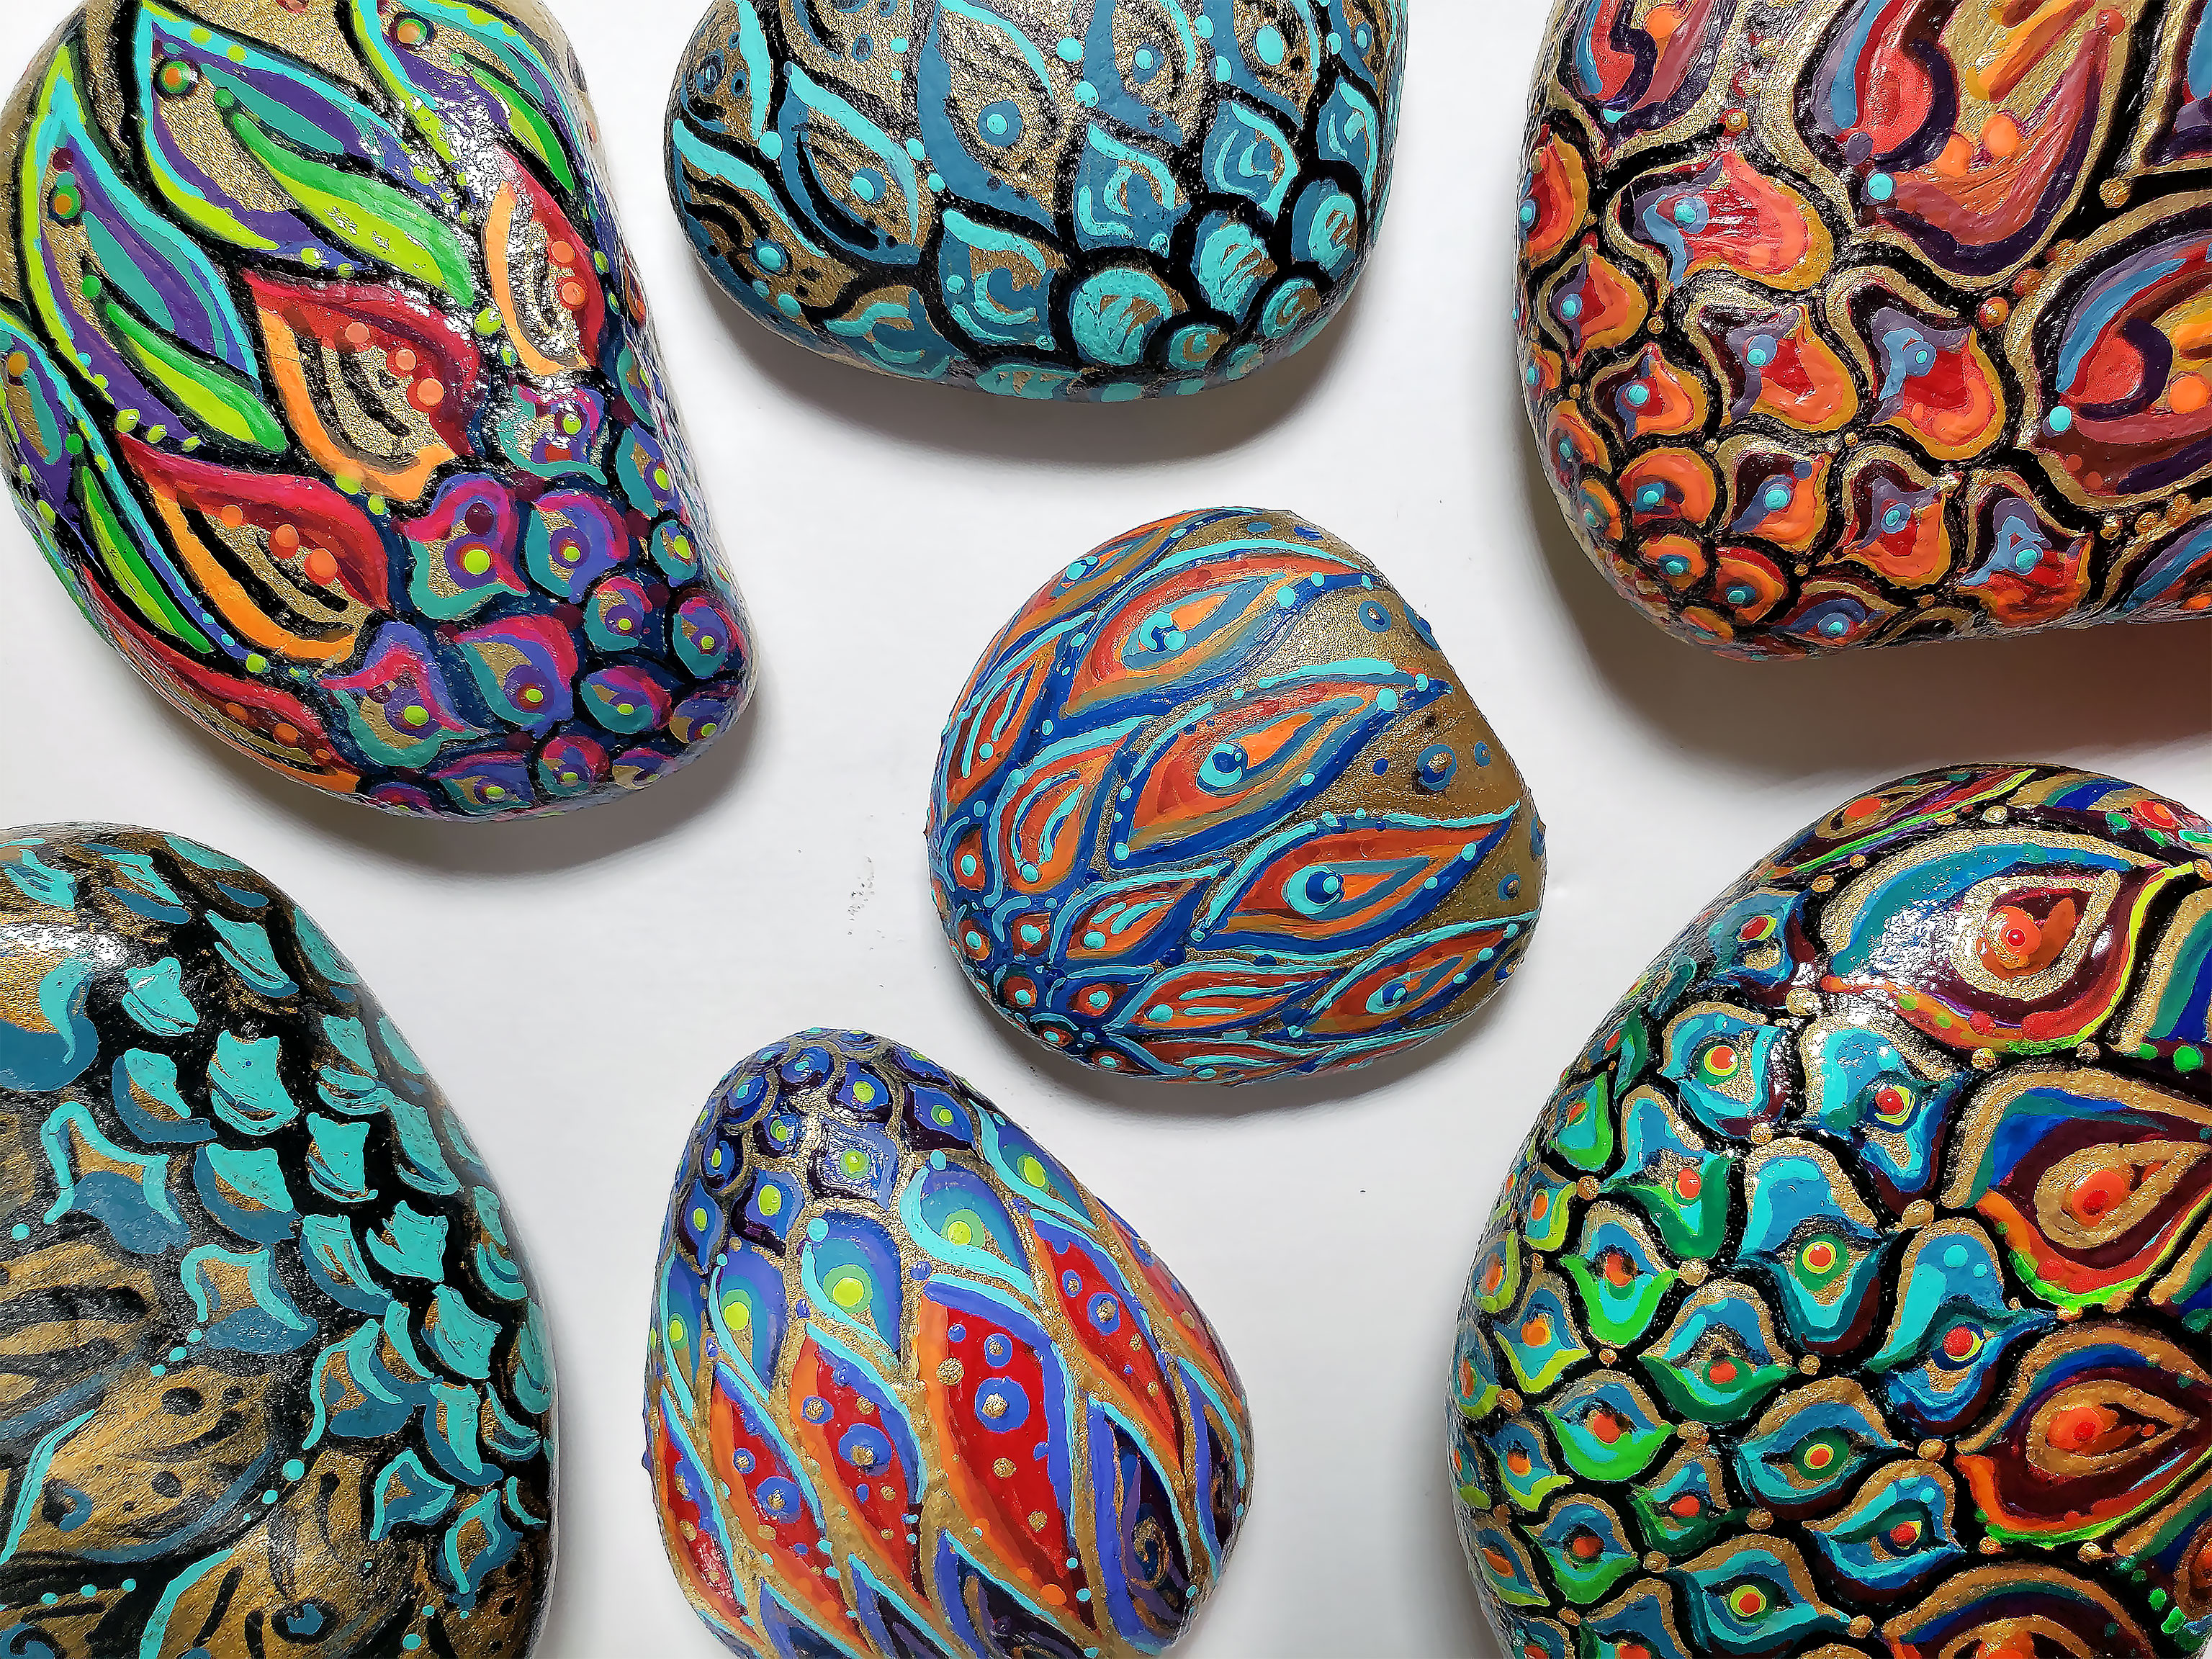 Pacific Northwest Beach Rocks Hand Painted like Colorful Mermaid Tails and Peacock Feathers.